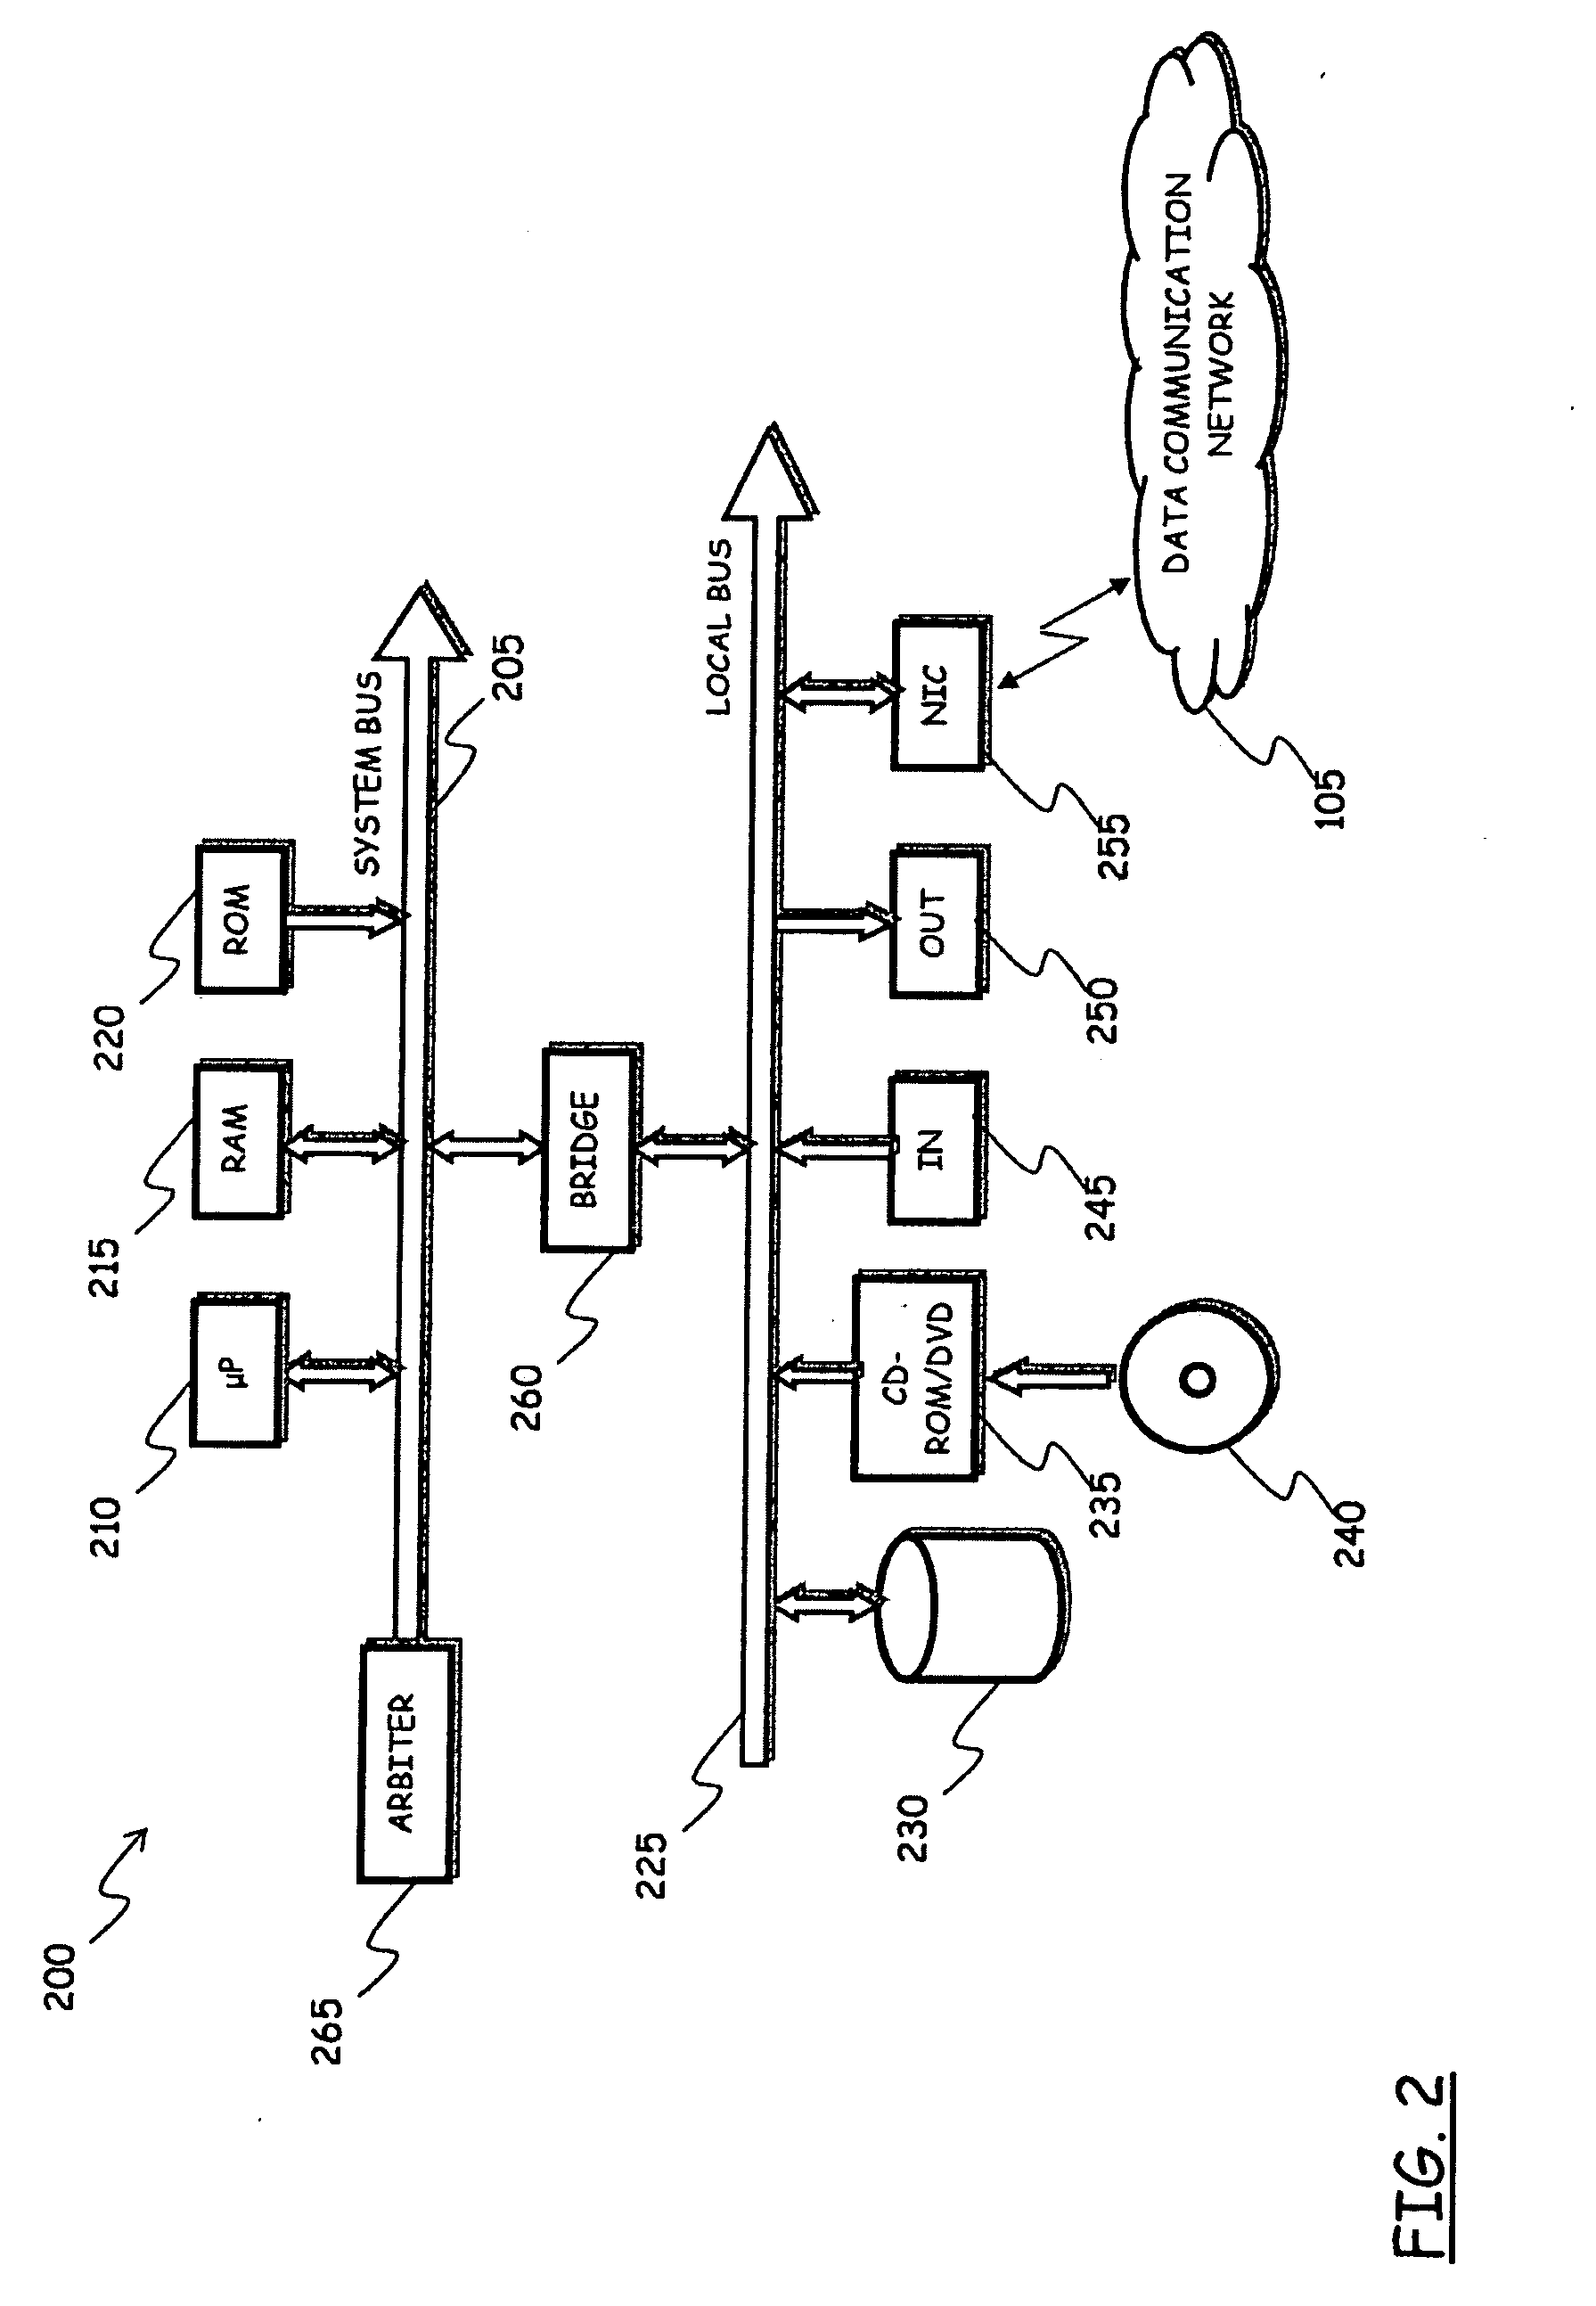 Method, System and Computer Program For The Centralized System Management On EndPoints Of A Distributed Data Processing System